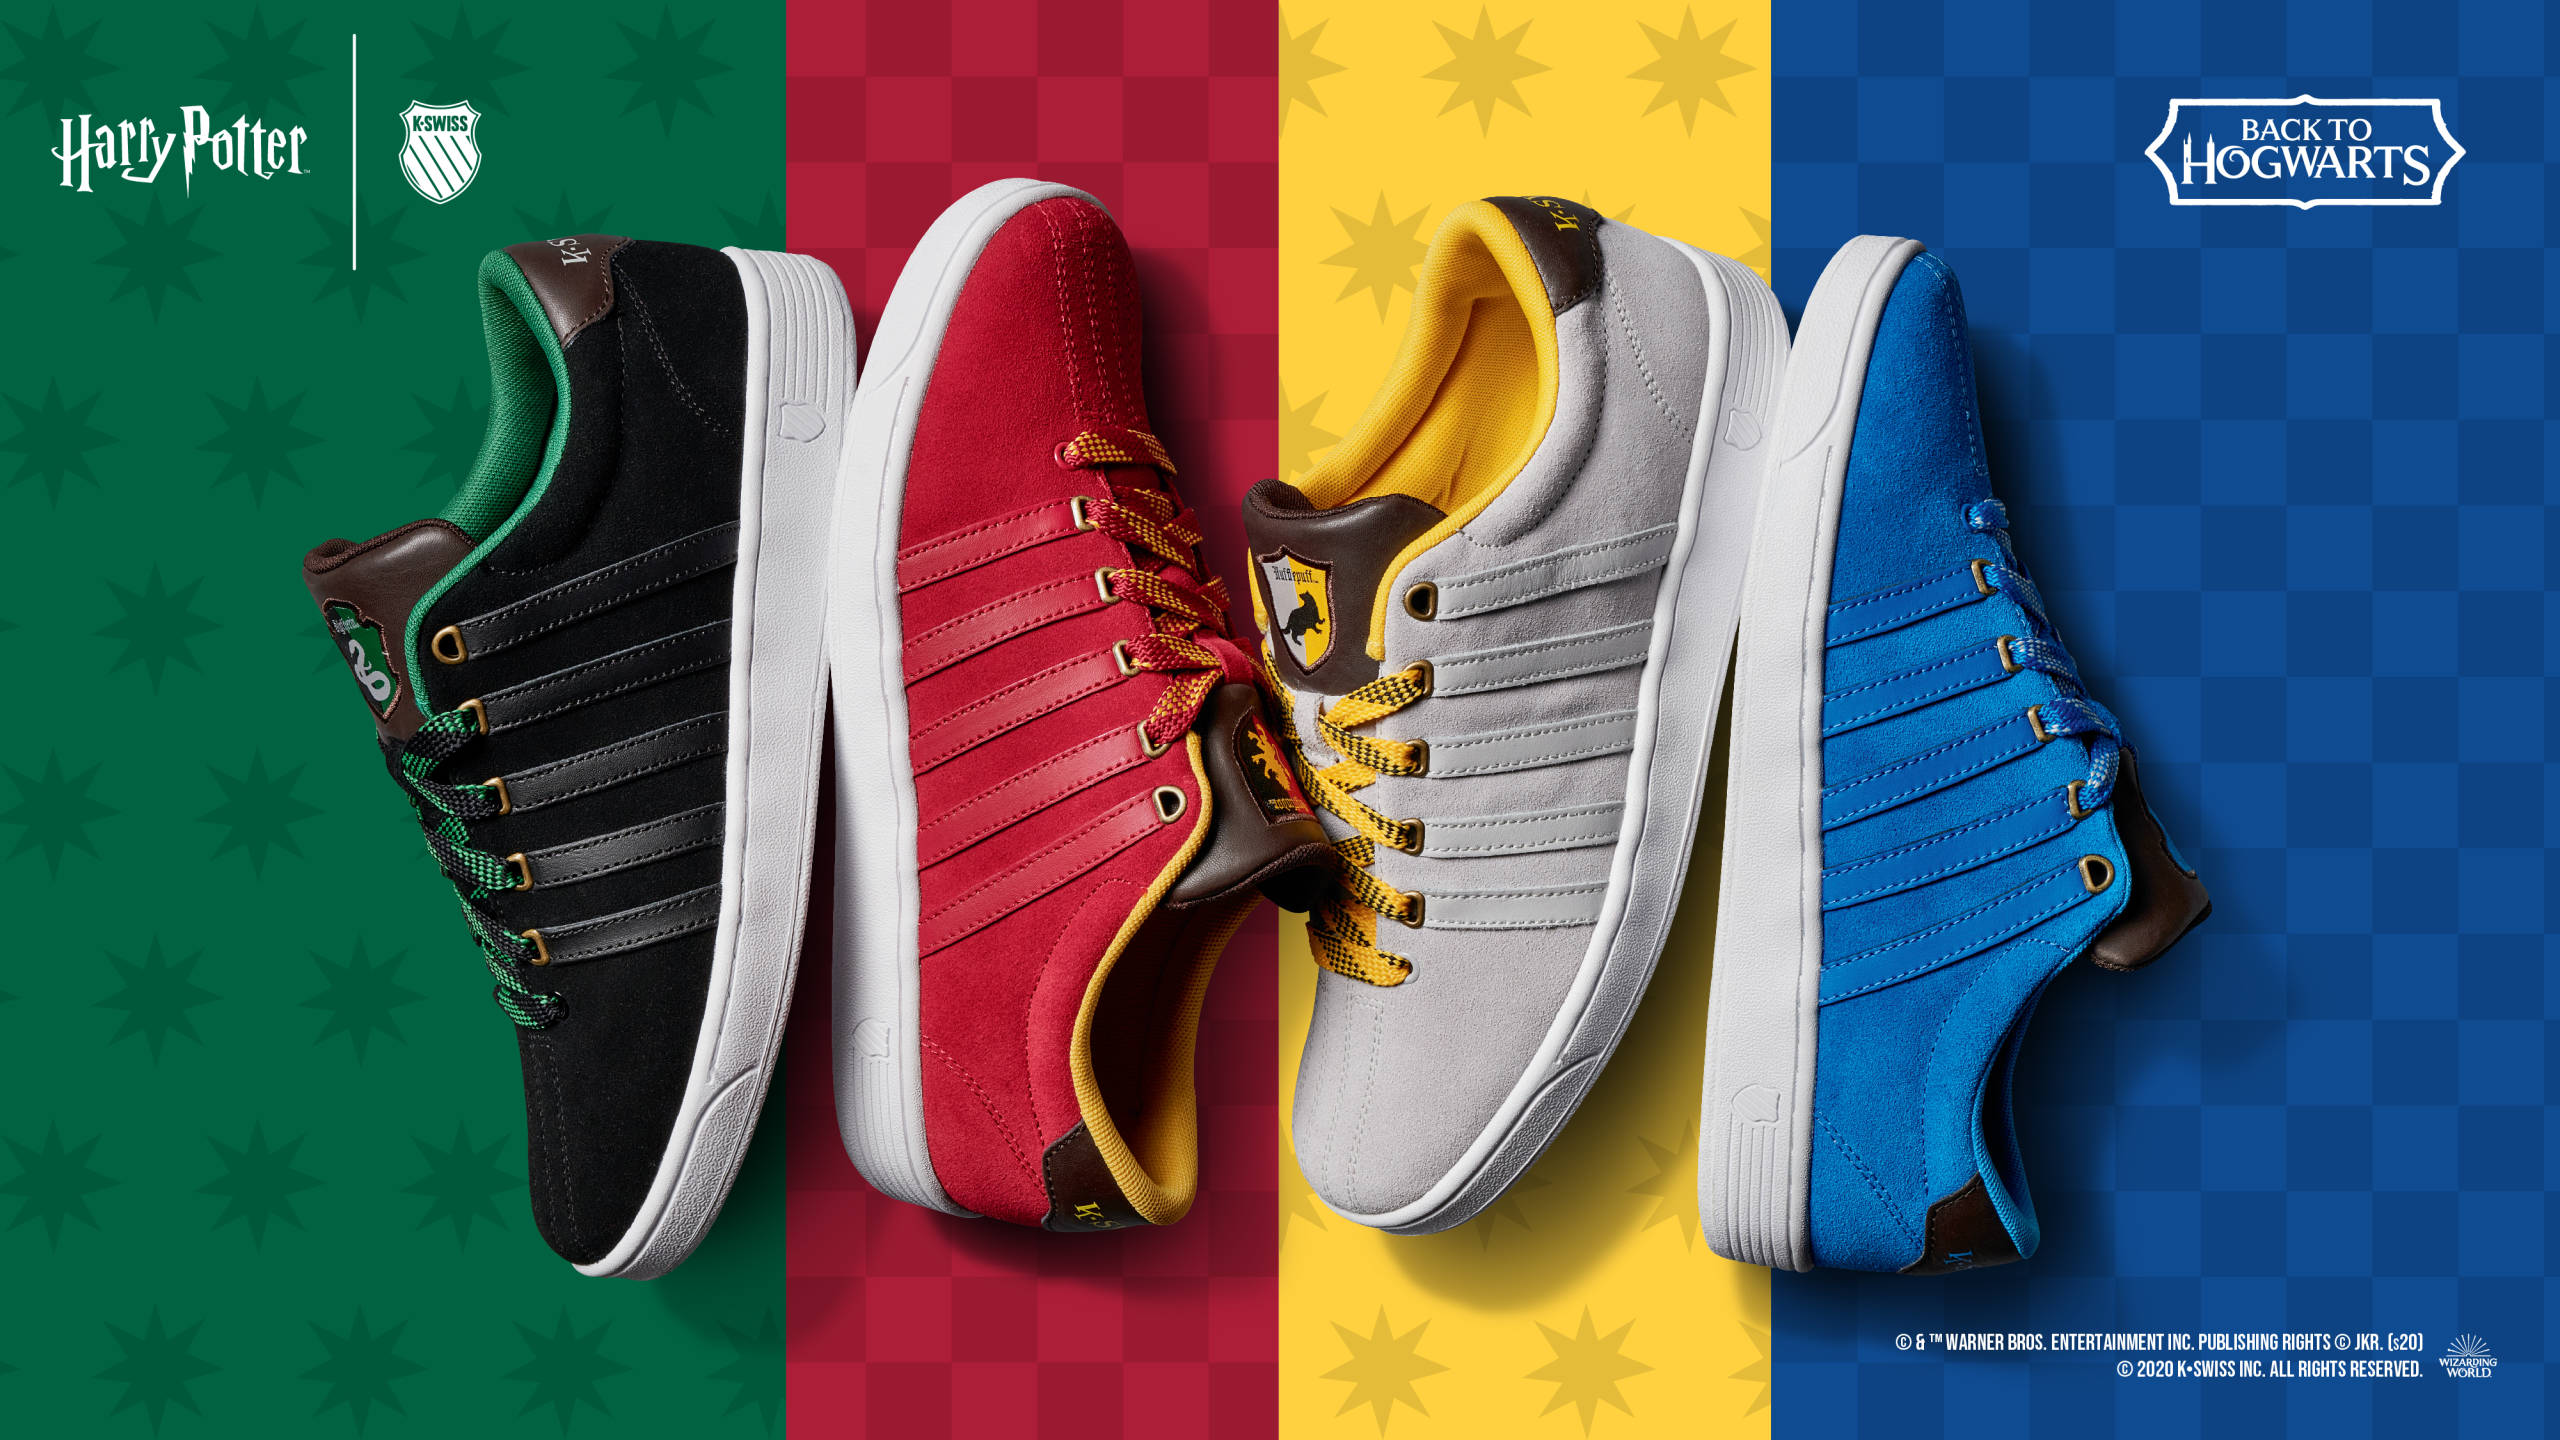 kswiss-back-to-hogwarts-collection-all-house-colours-hero-web-image